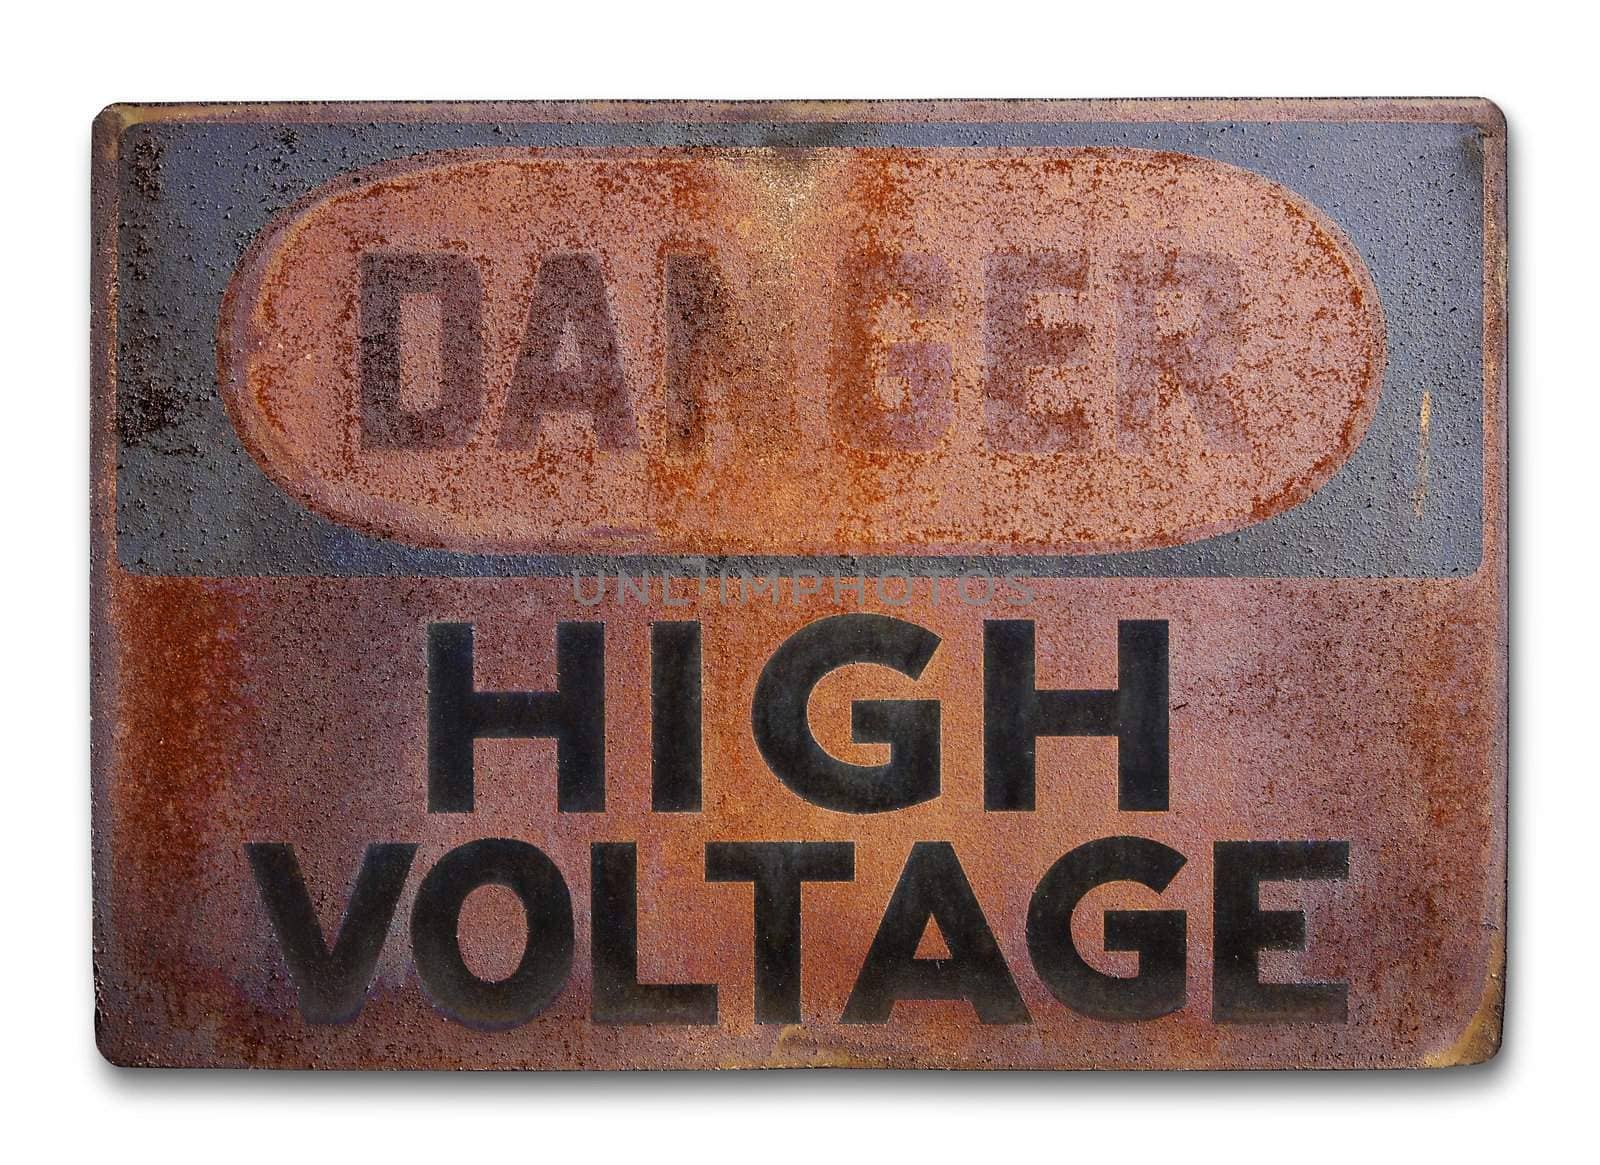 Old vintage warning sign - rusty and weathered